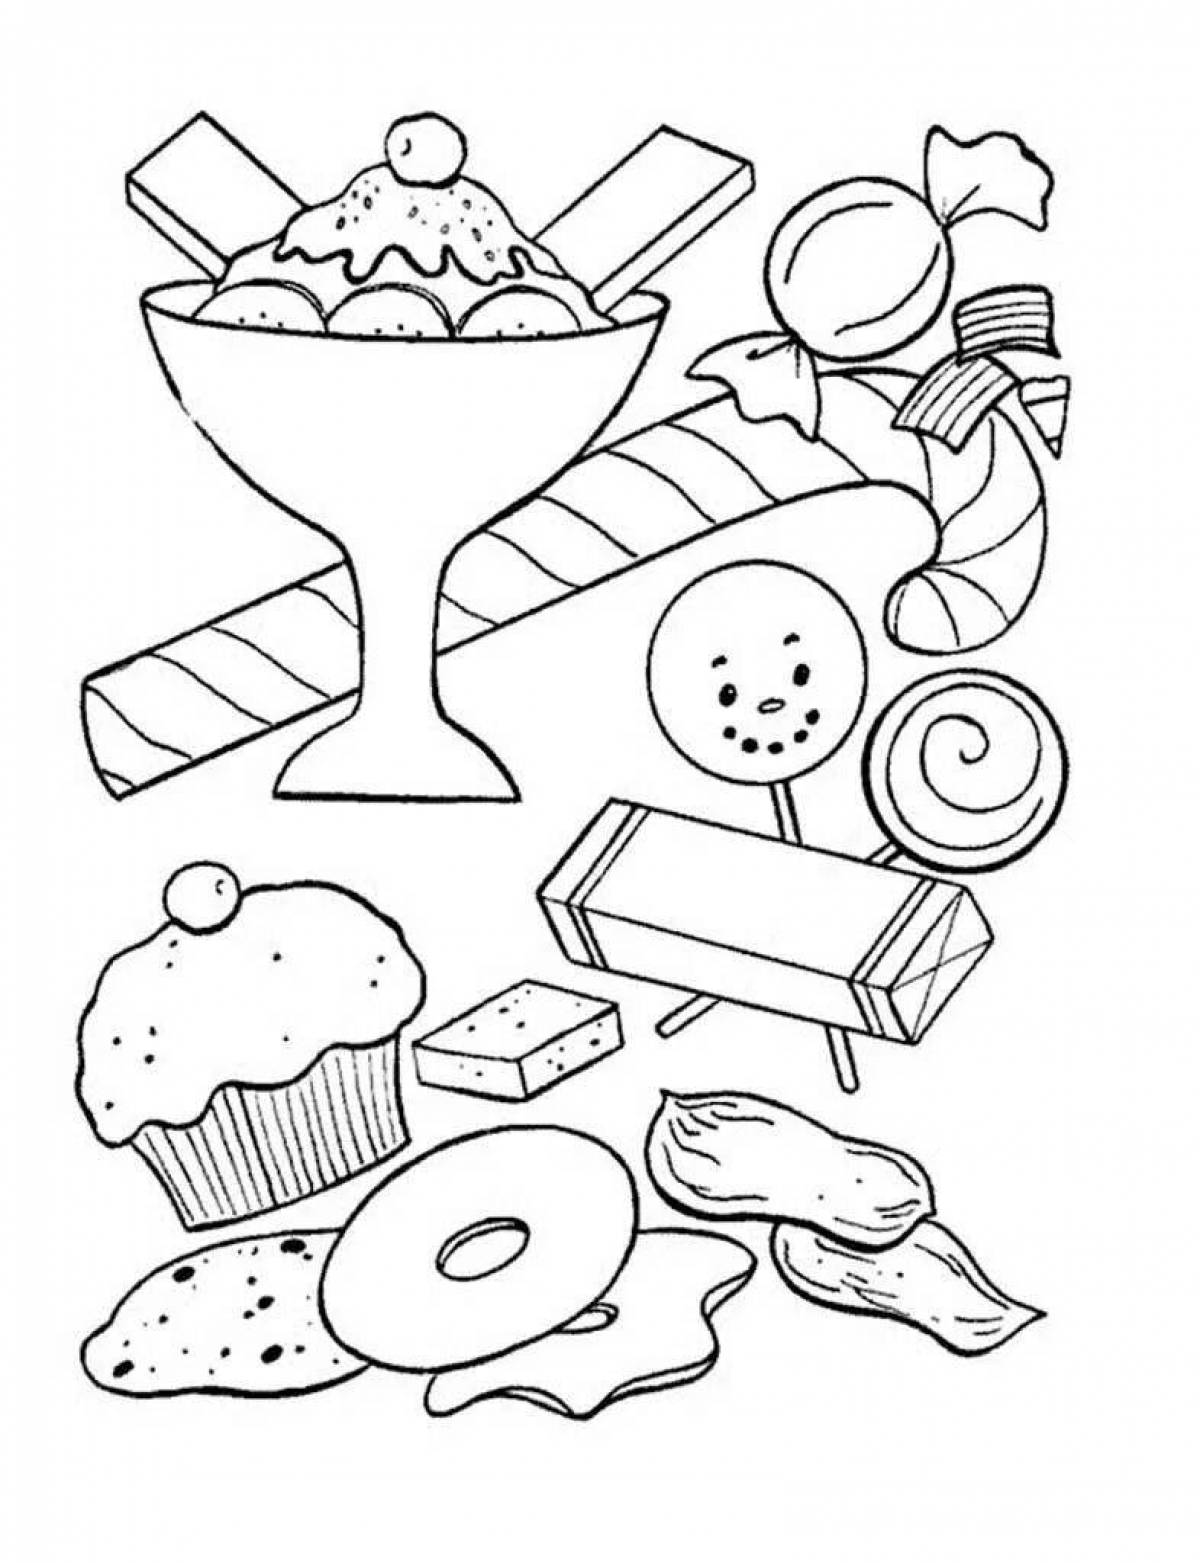 Coloring book nutritious food for kids